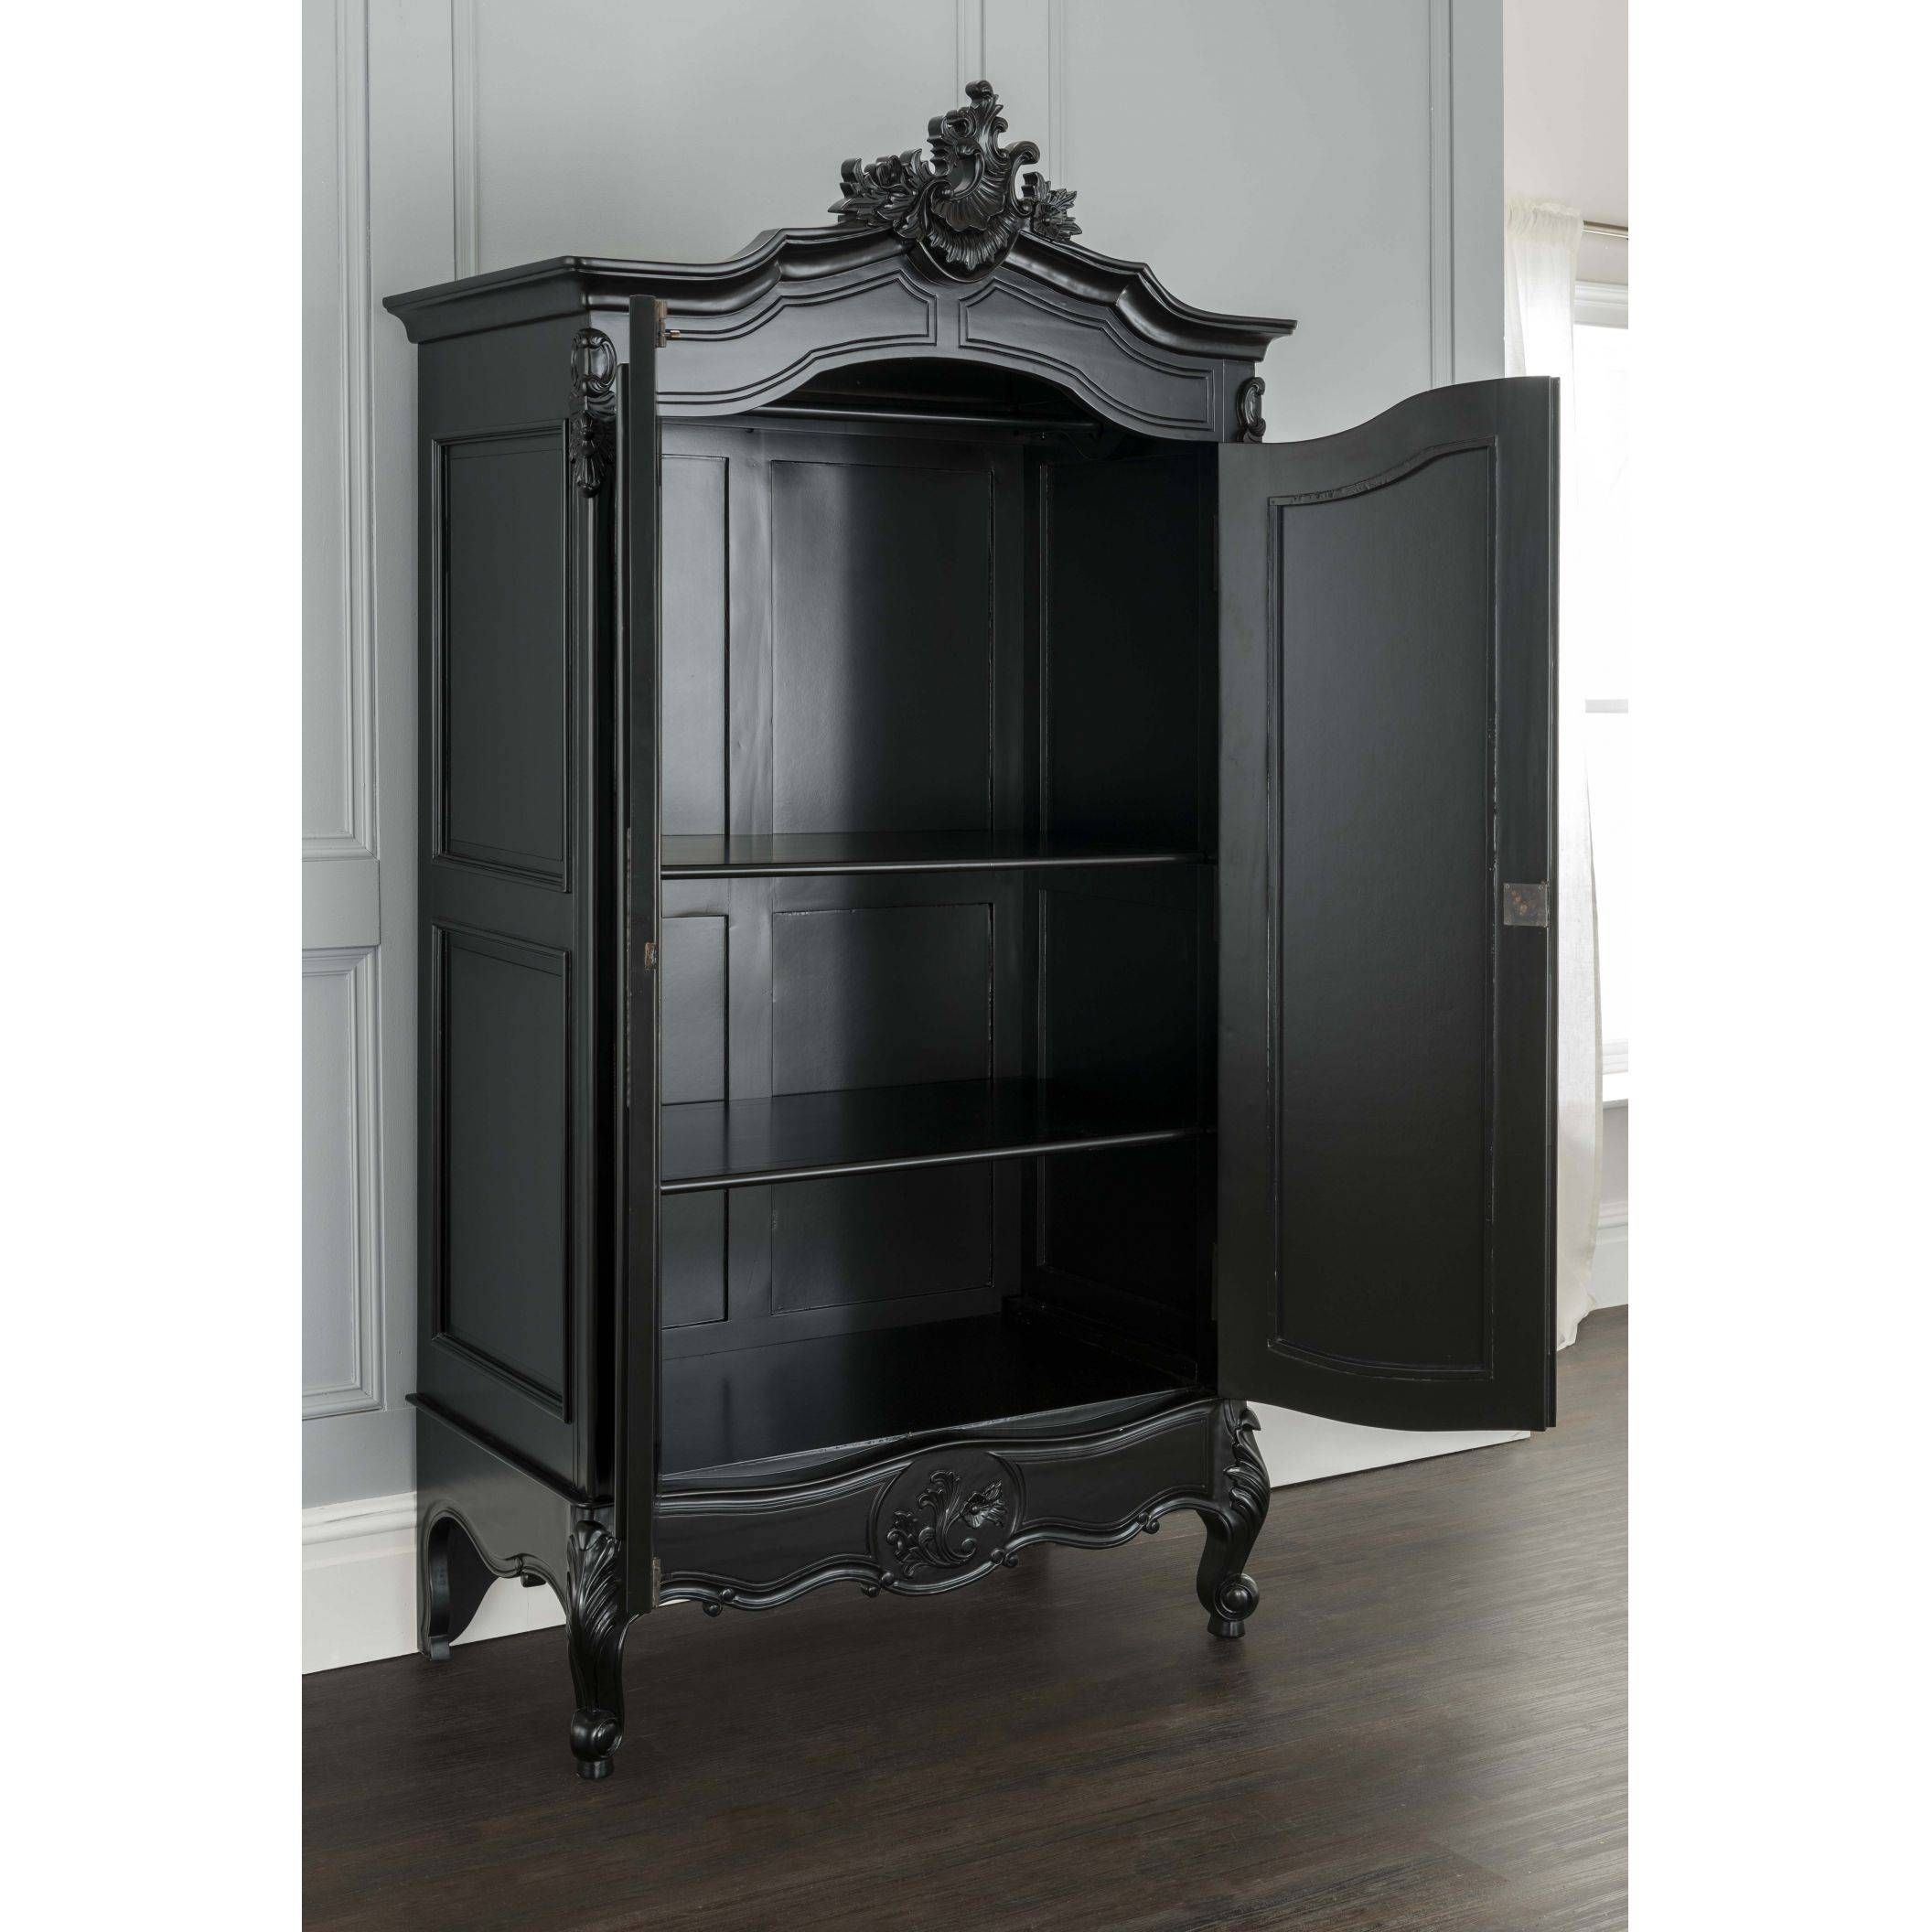 La Rochelle Antique French Wardrobe | Black Furniture Collection Pertaining To Black French Wardrobes (View 3 of 15)